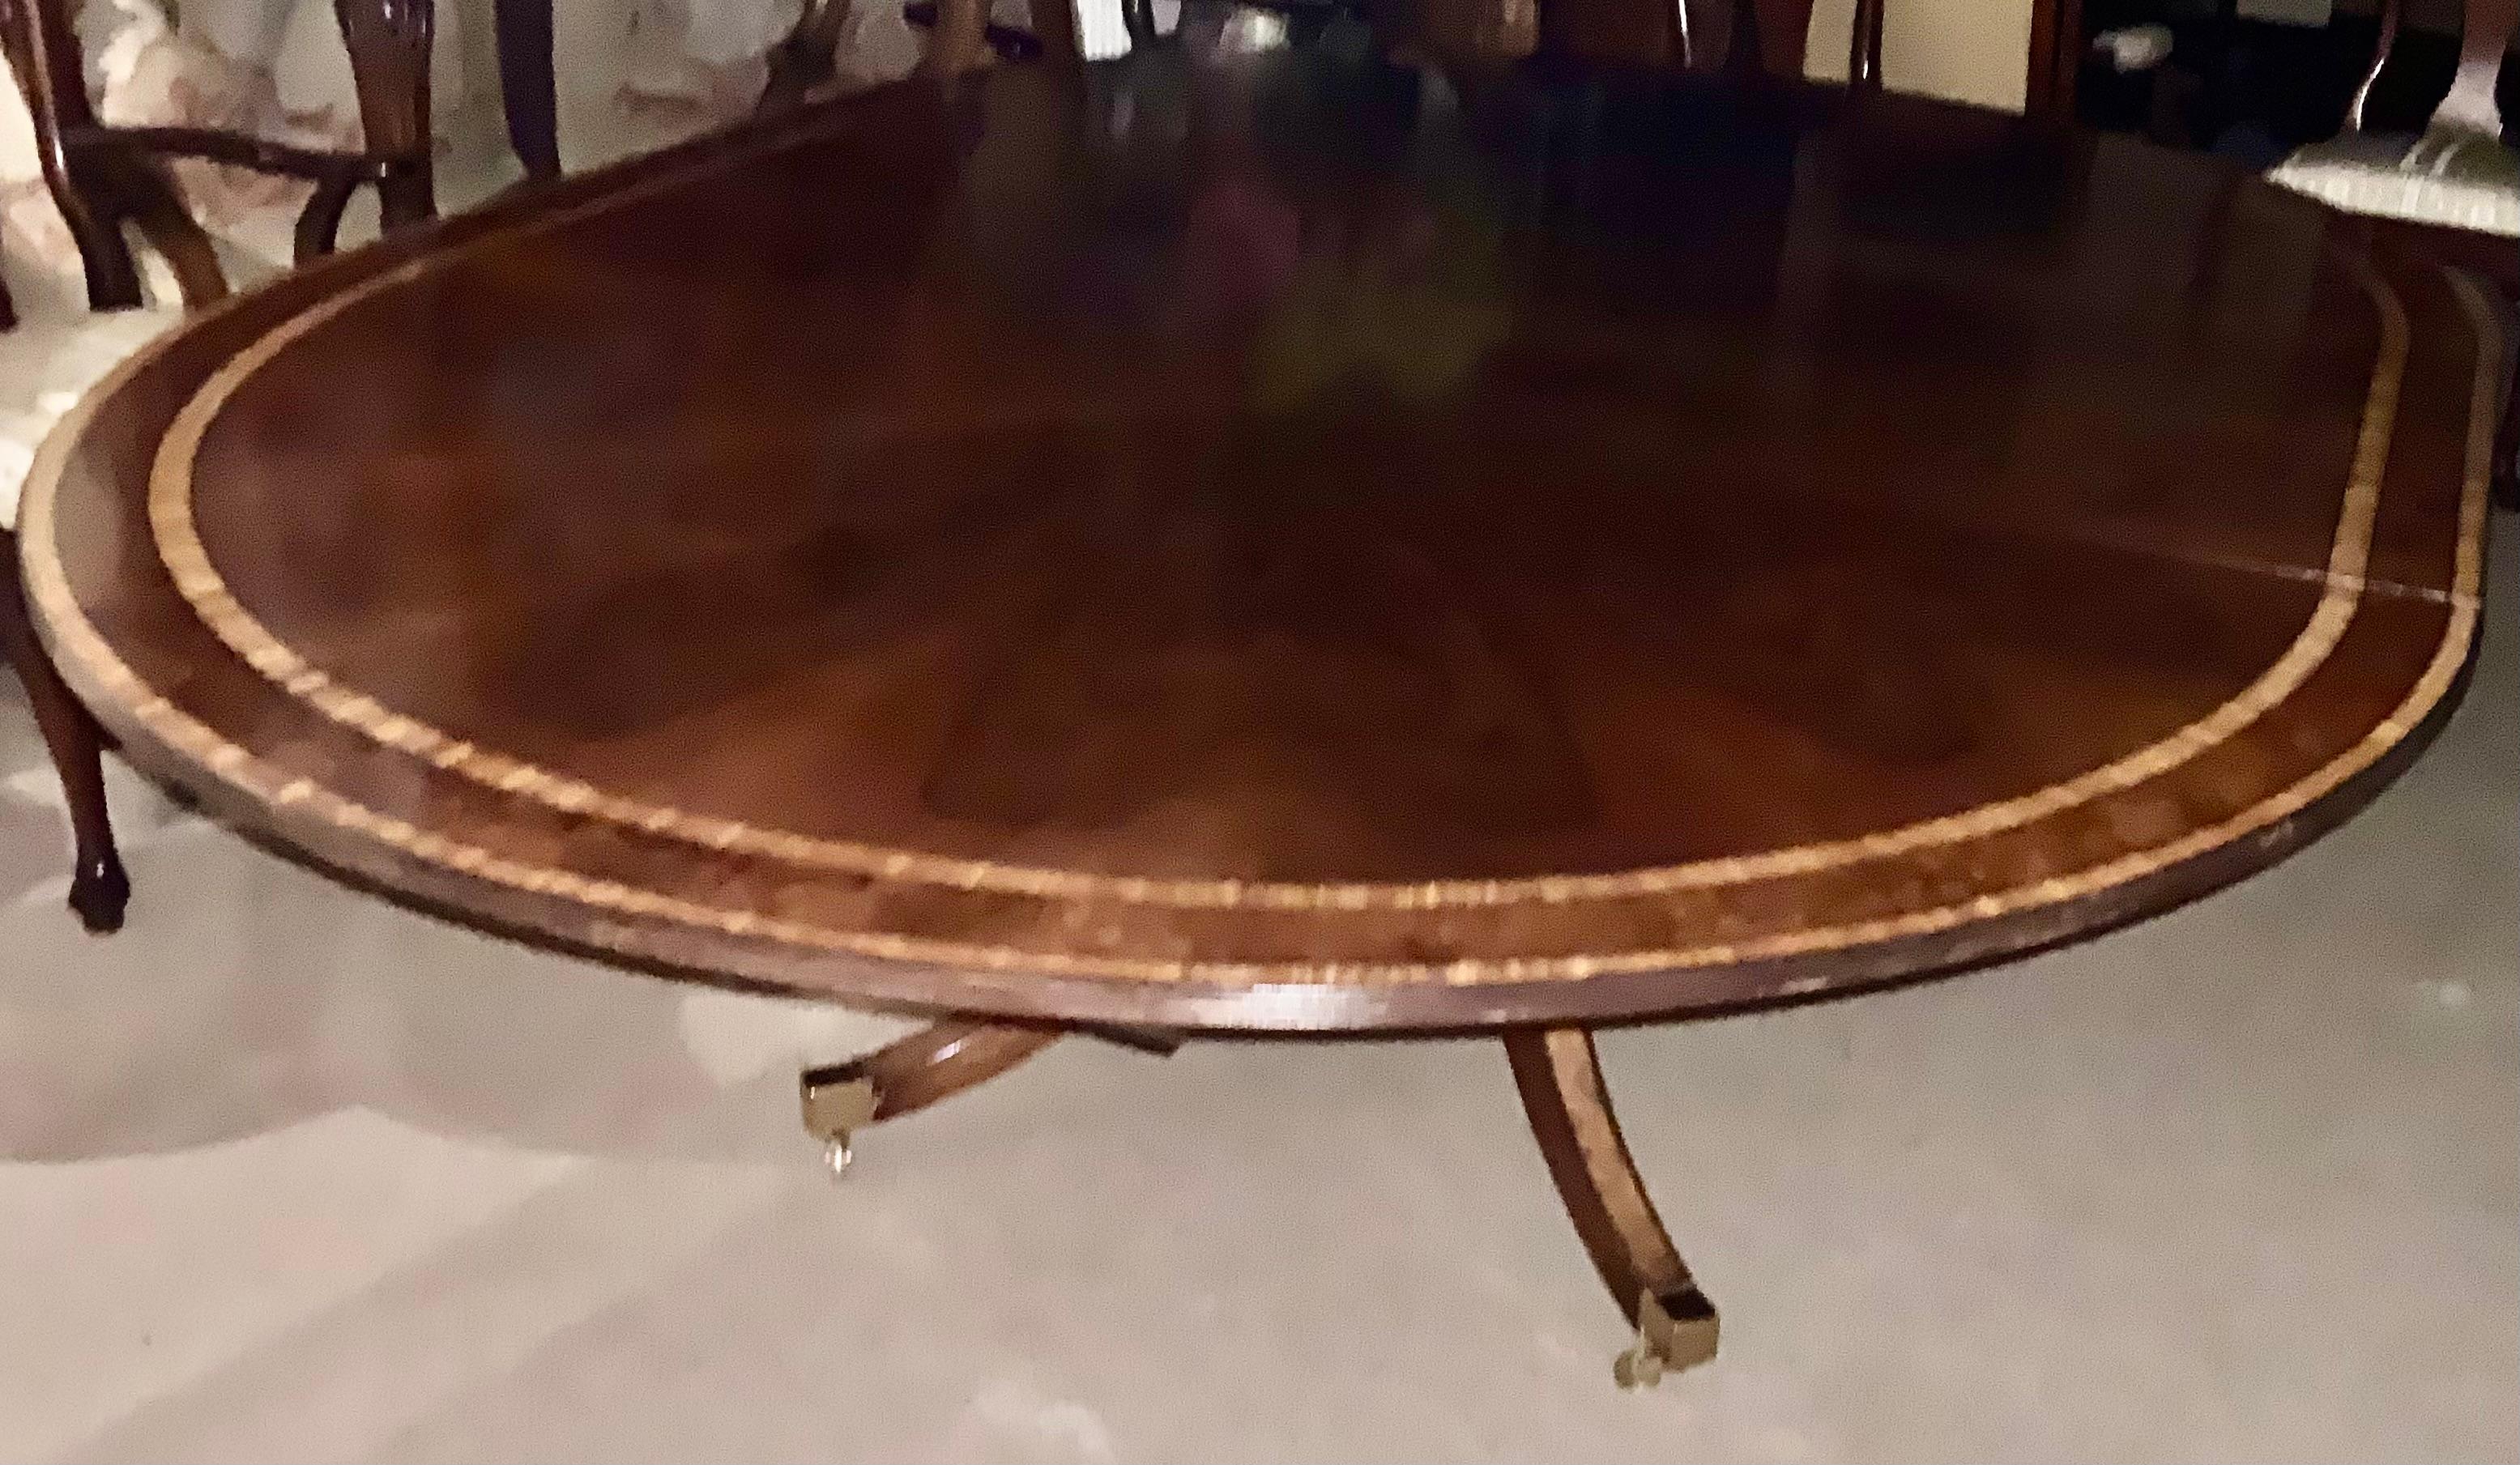 This table is unique because it can be either round or oval
Depending on how it is needed. It is a 68” diameter round
Table and it has a 24” leaf which converts the table to an
Oval shape which is 92” when the leaf is inserted. It is made
Of a